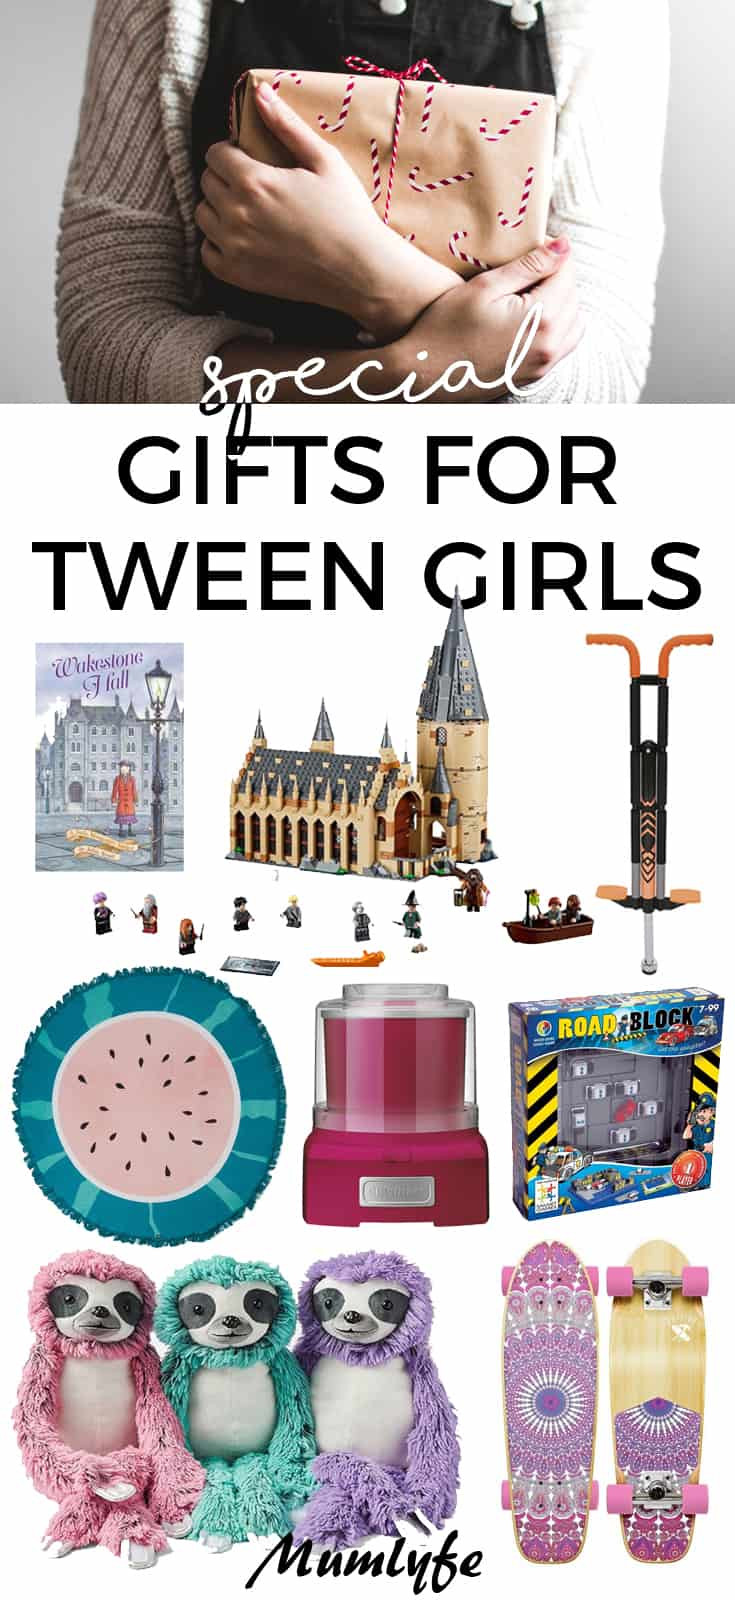 Top Gift Ideas For Girls
 Special t ideas for tween girls best t list for